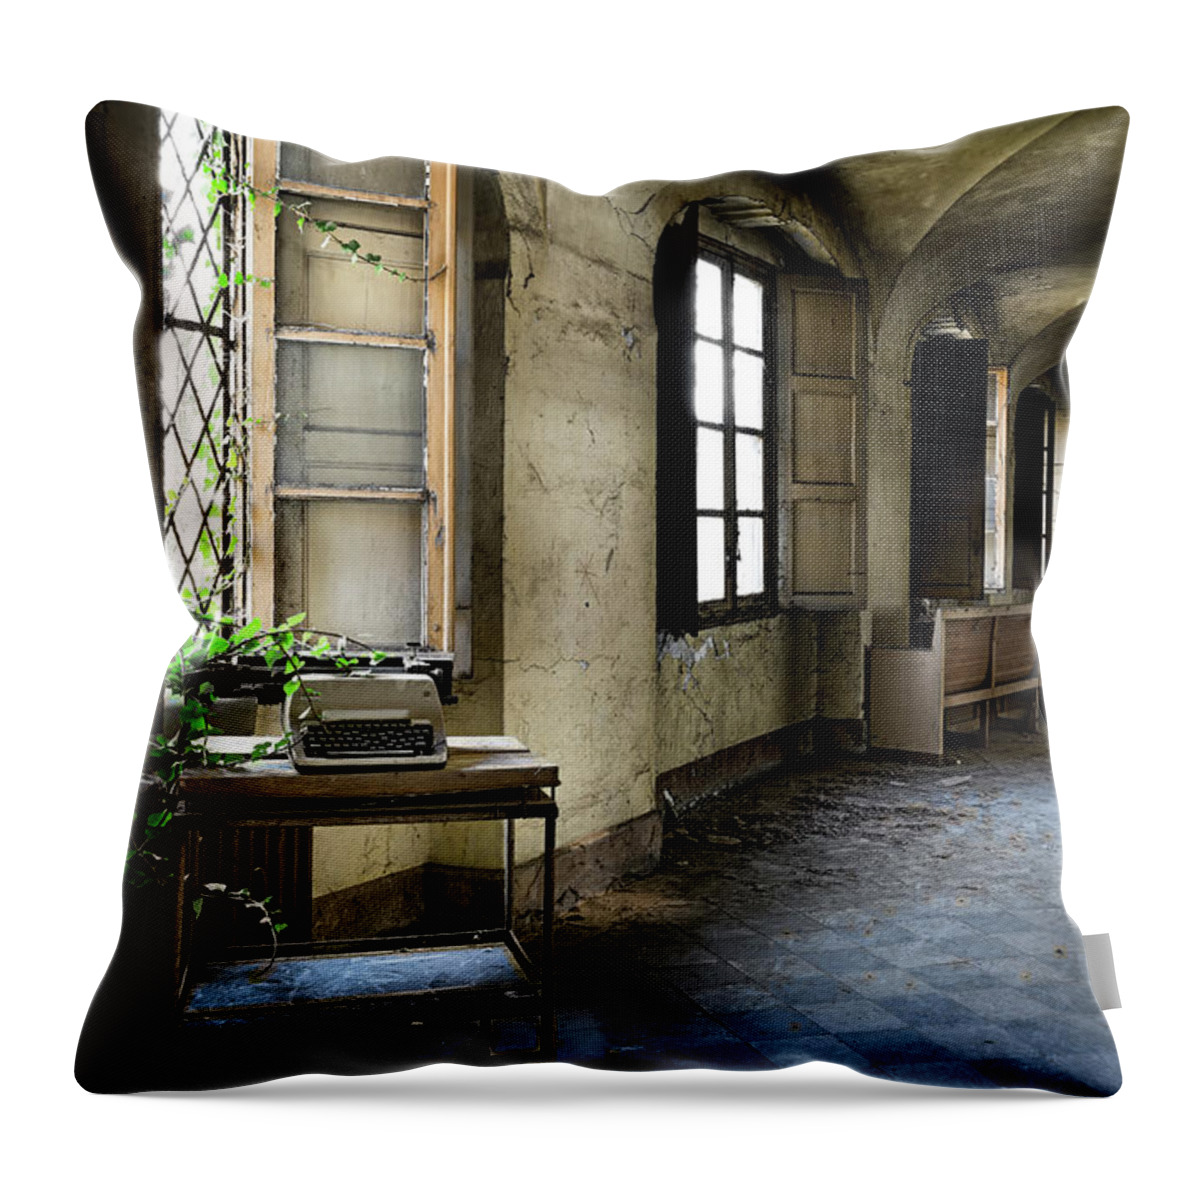 Abandoned Throw Pillow featuring the photograph Typewriter Story Of Abandoned Building - Urbex Exploration by Dirk Ercken